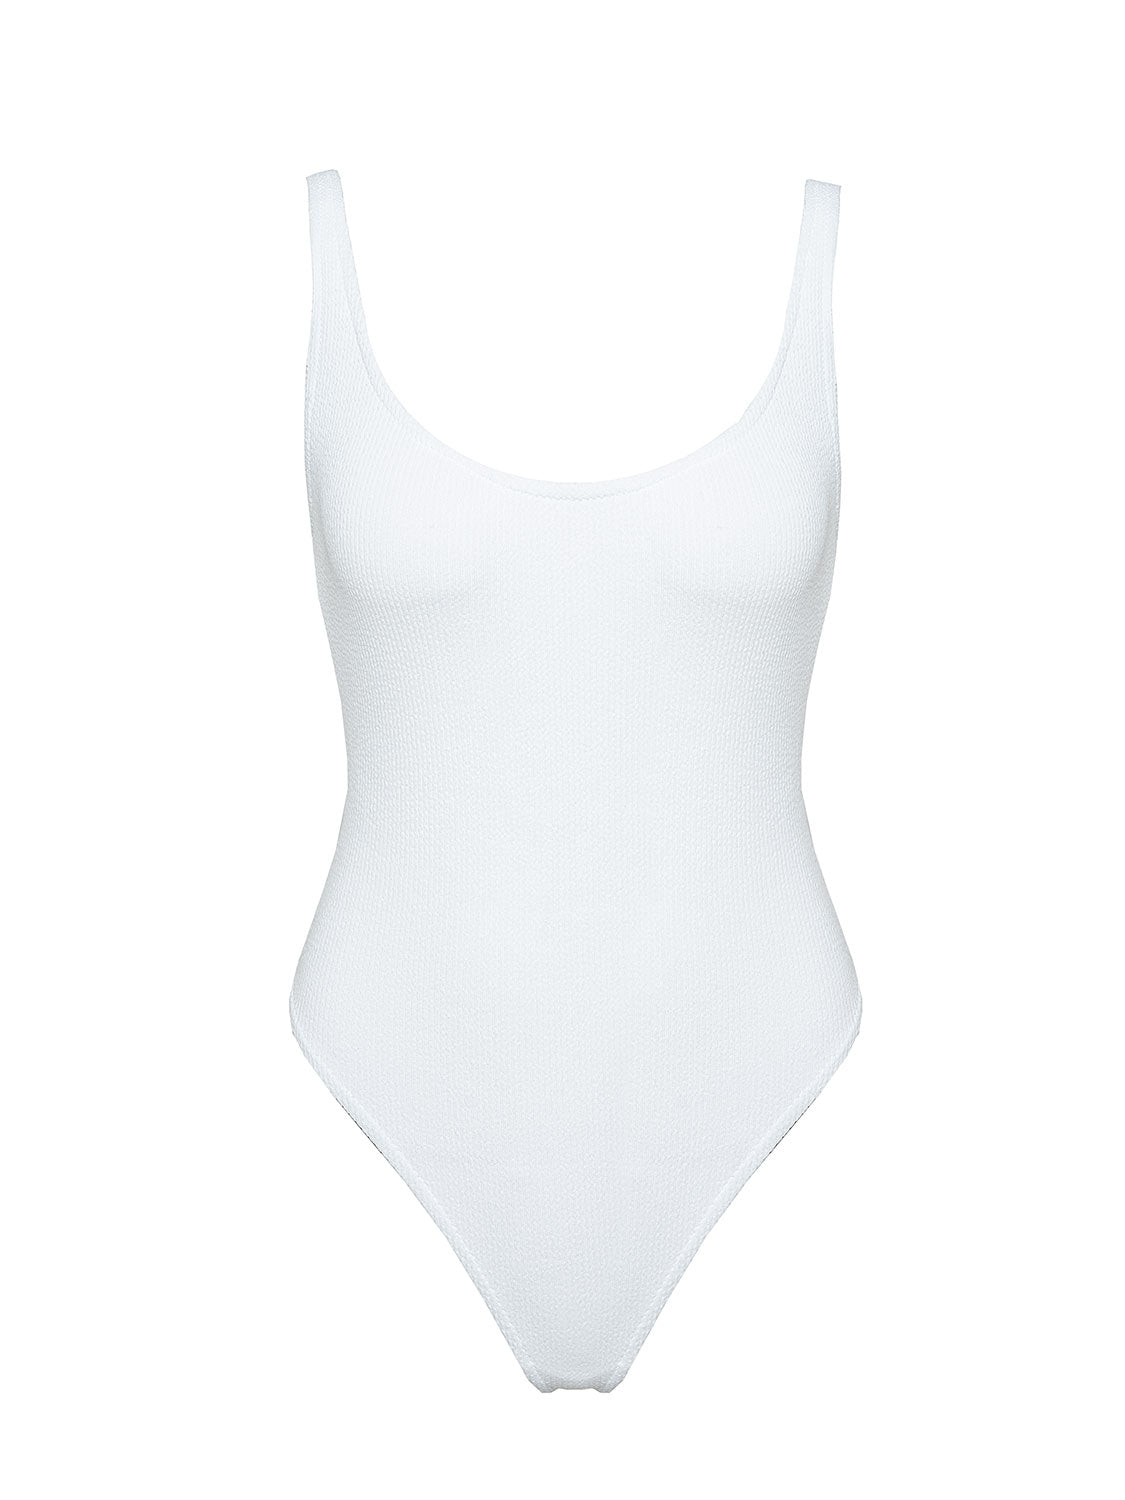 white one piece swimsuit one size